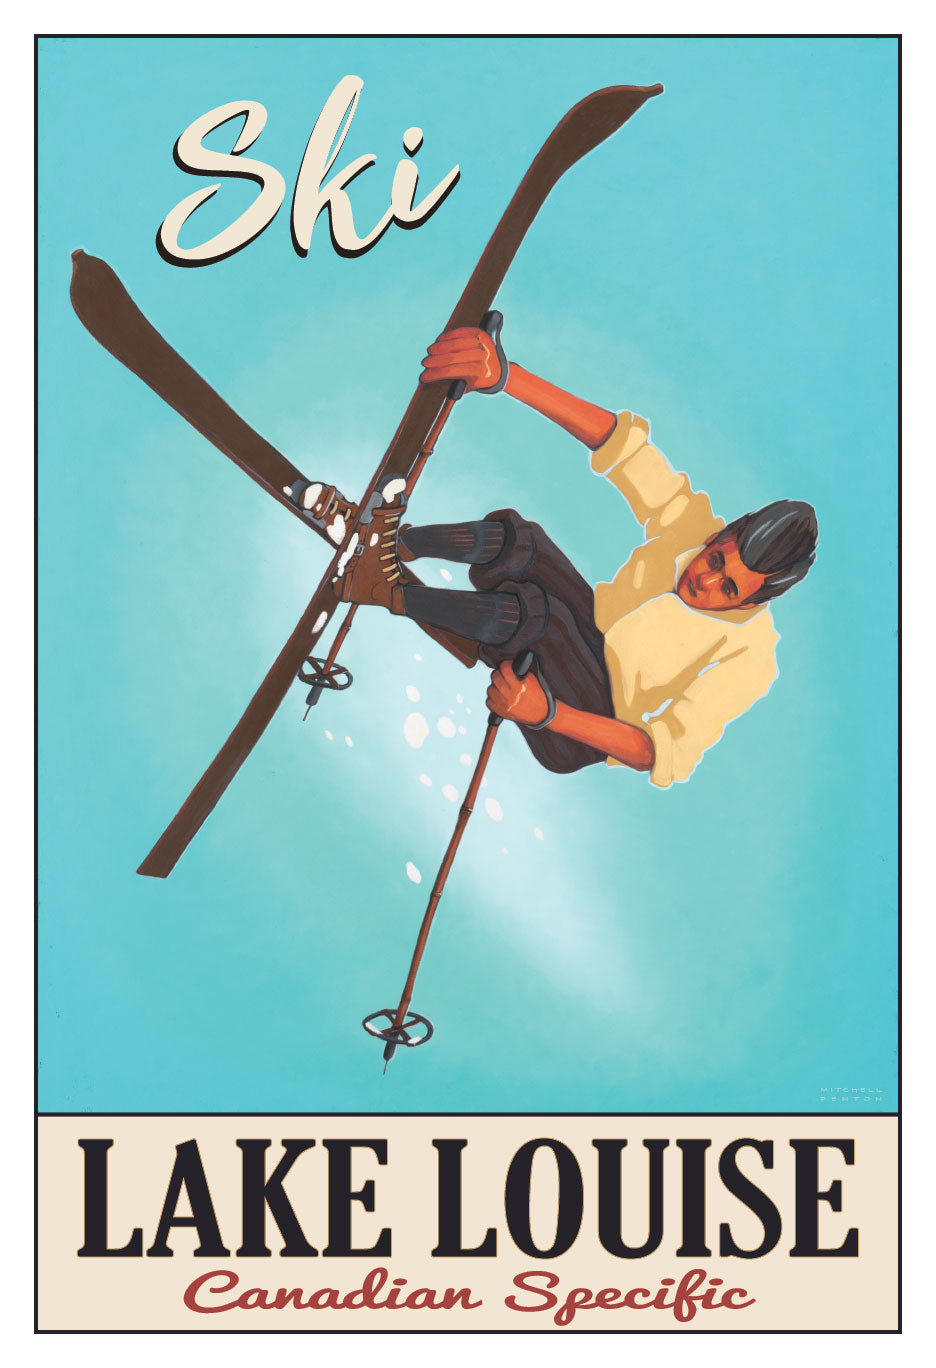 Vintage style ski poster of freestyle skier executing a Mute Grab